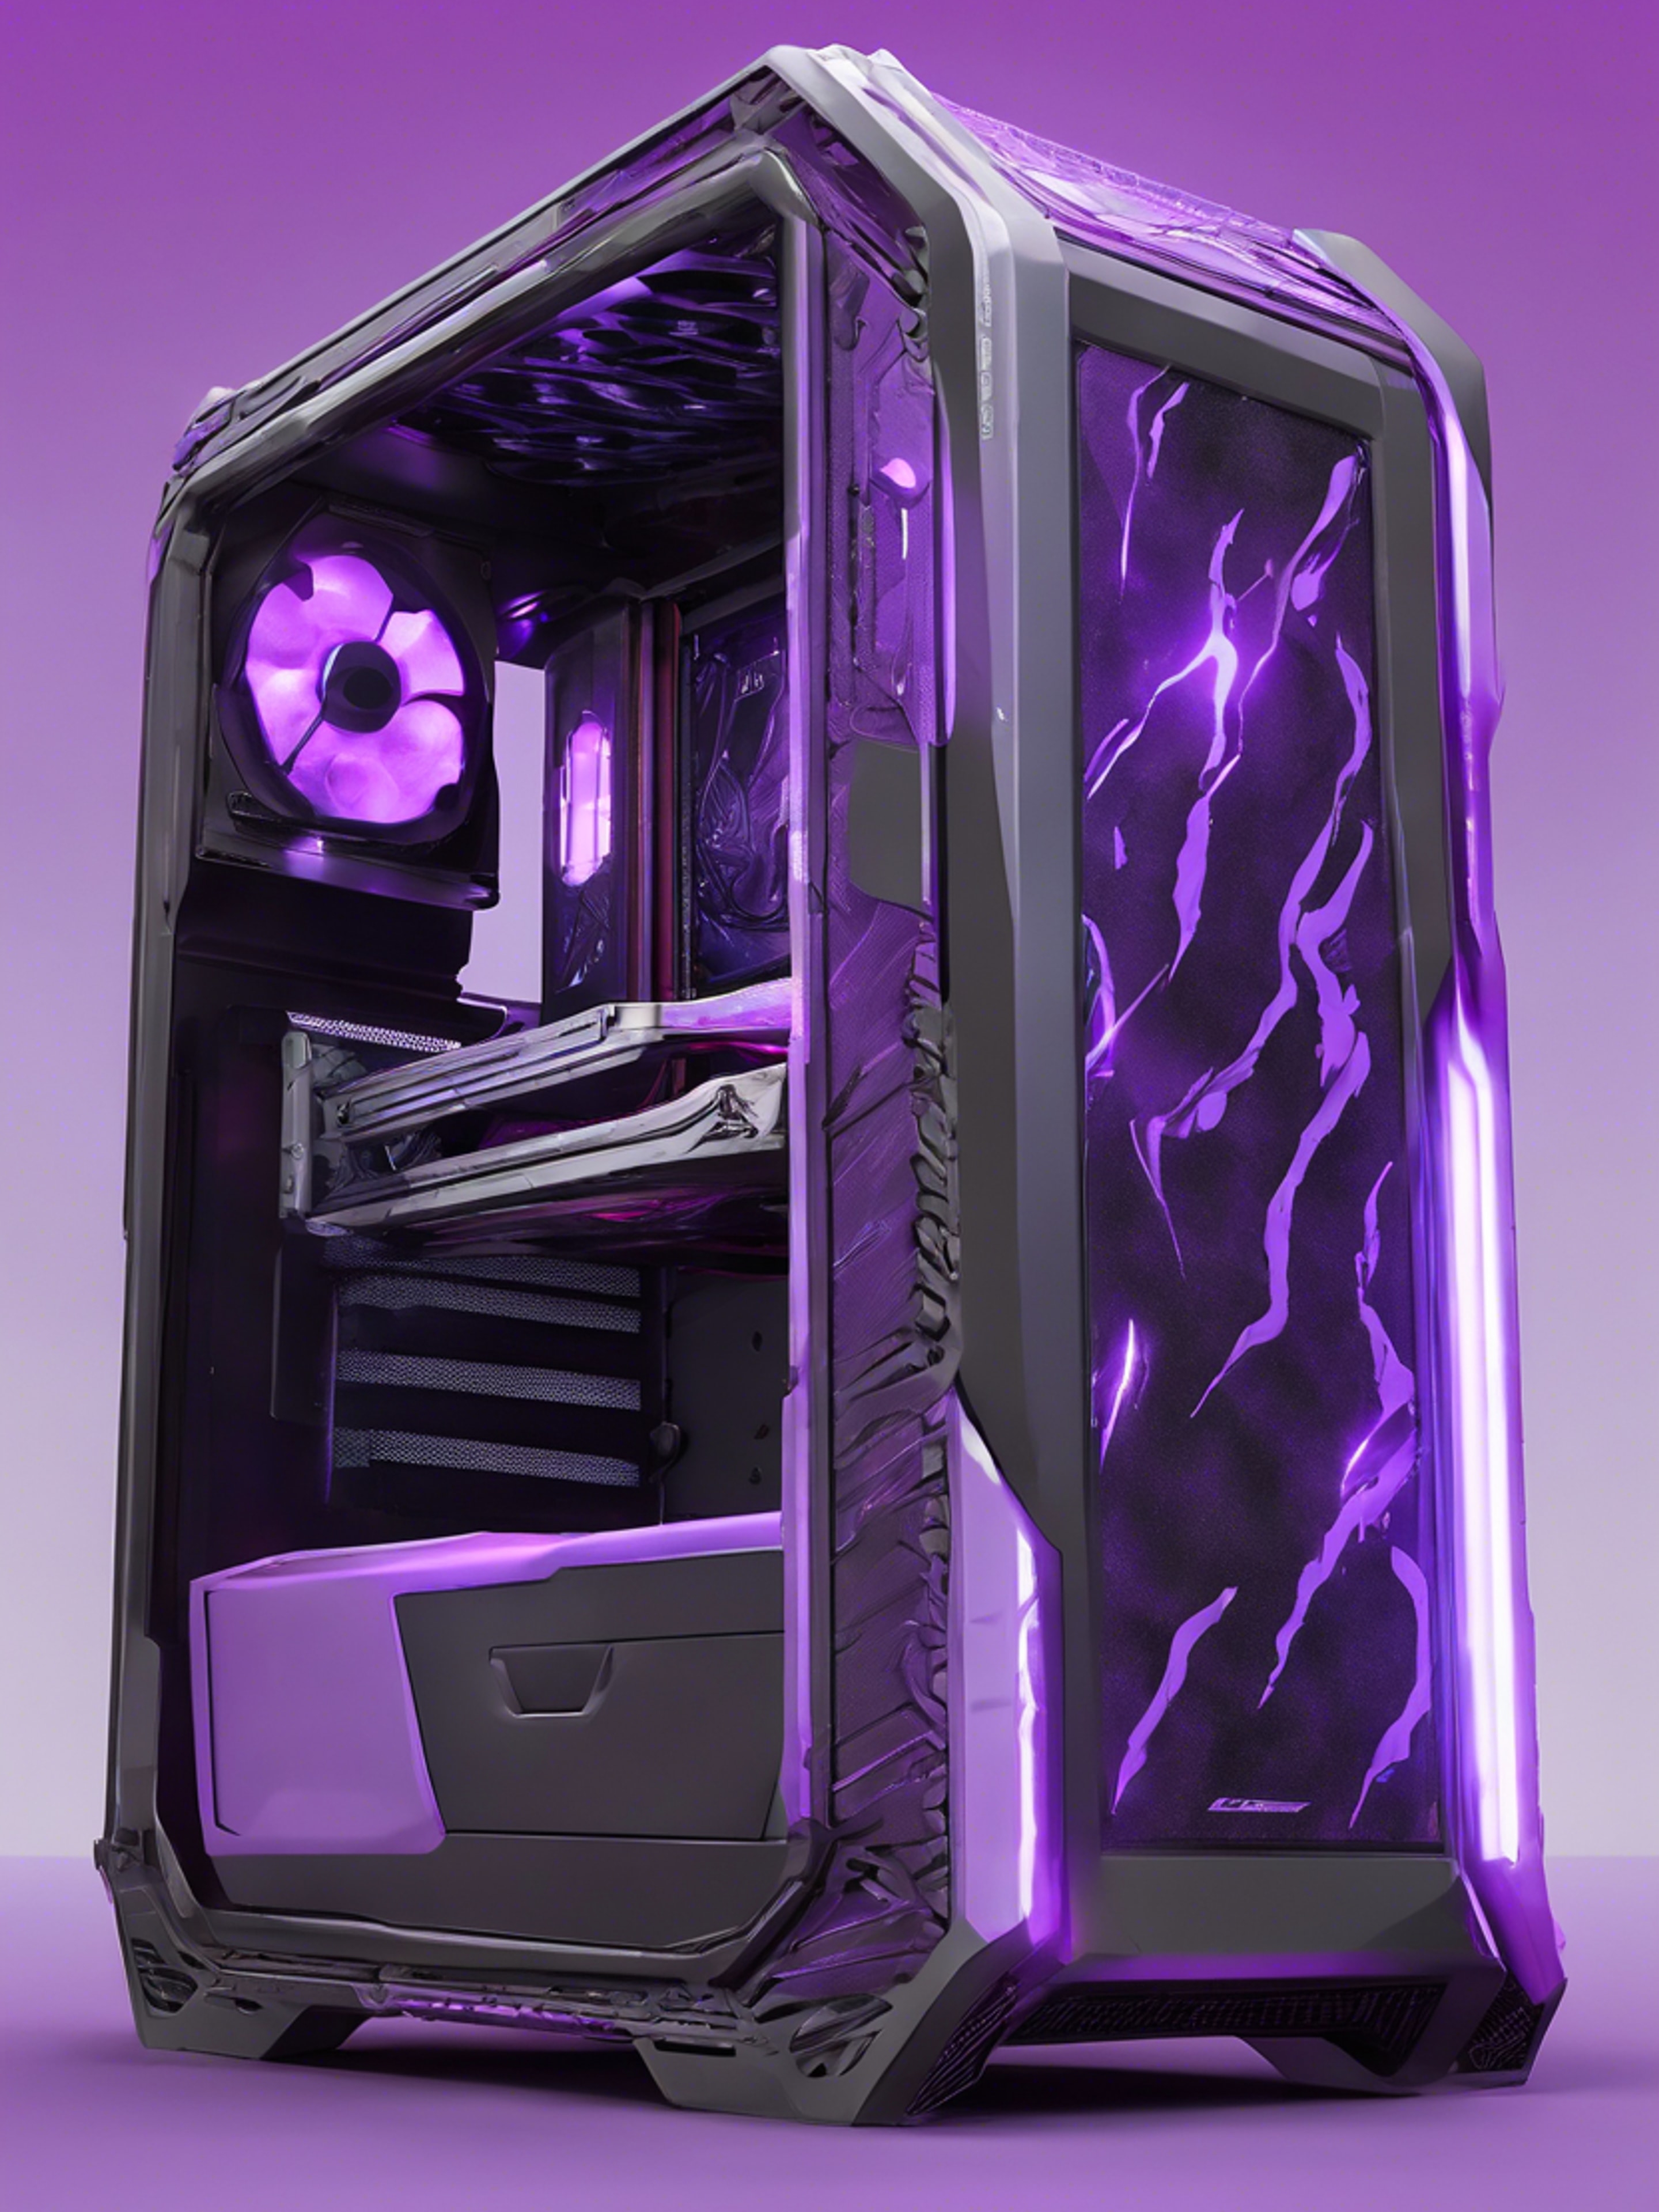 A side view of a thunderous gaming rig covered in custom neon purple detailing under cool lighting. ورق الجدران[cca71b66ee6840febbf4]